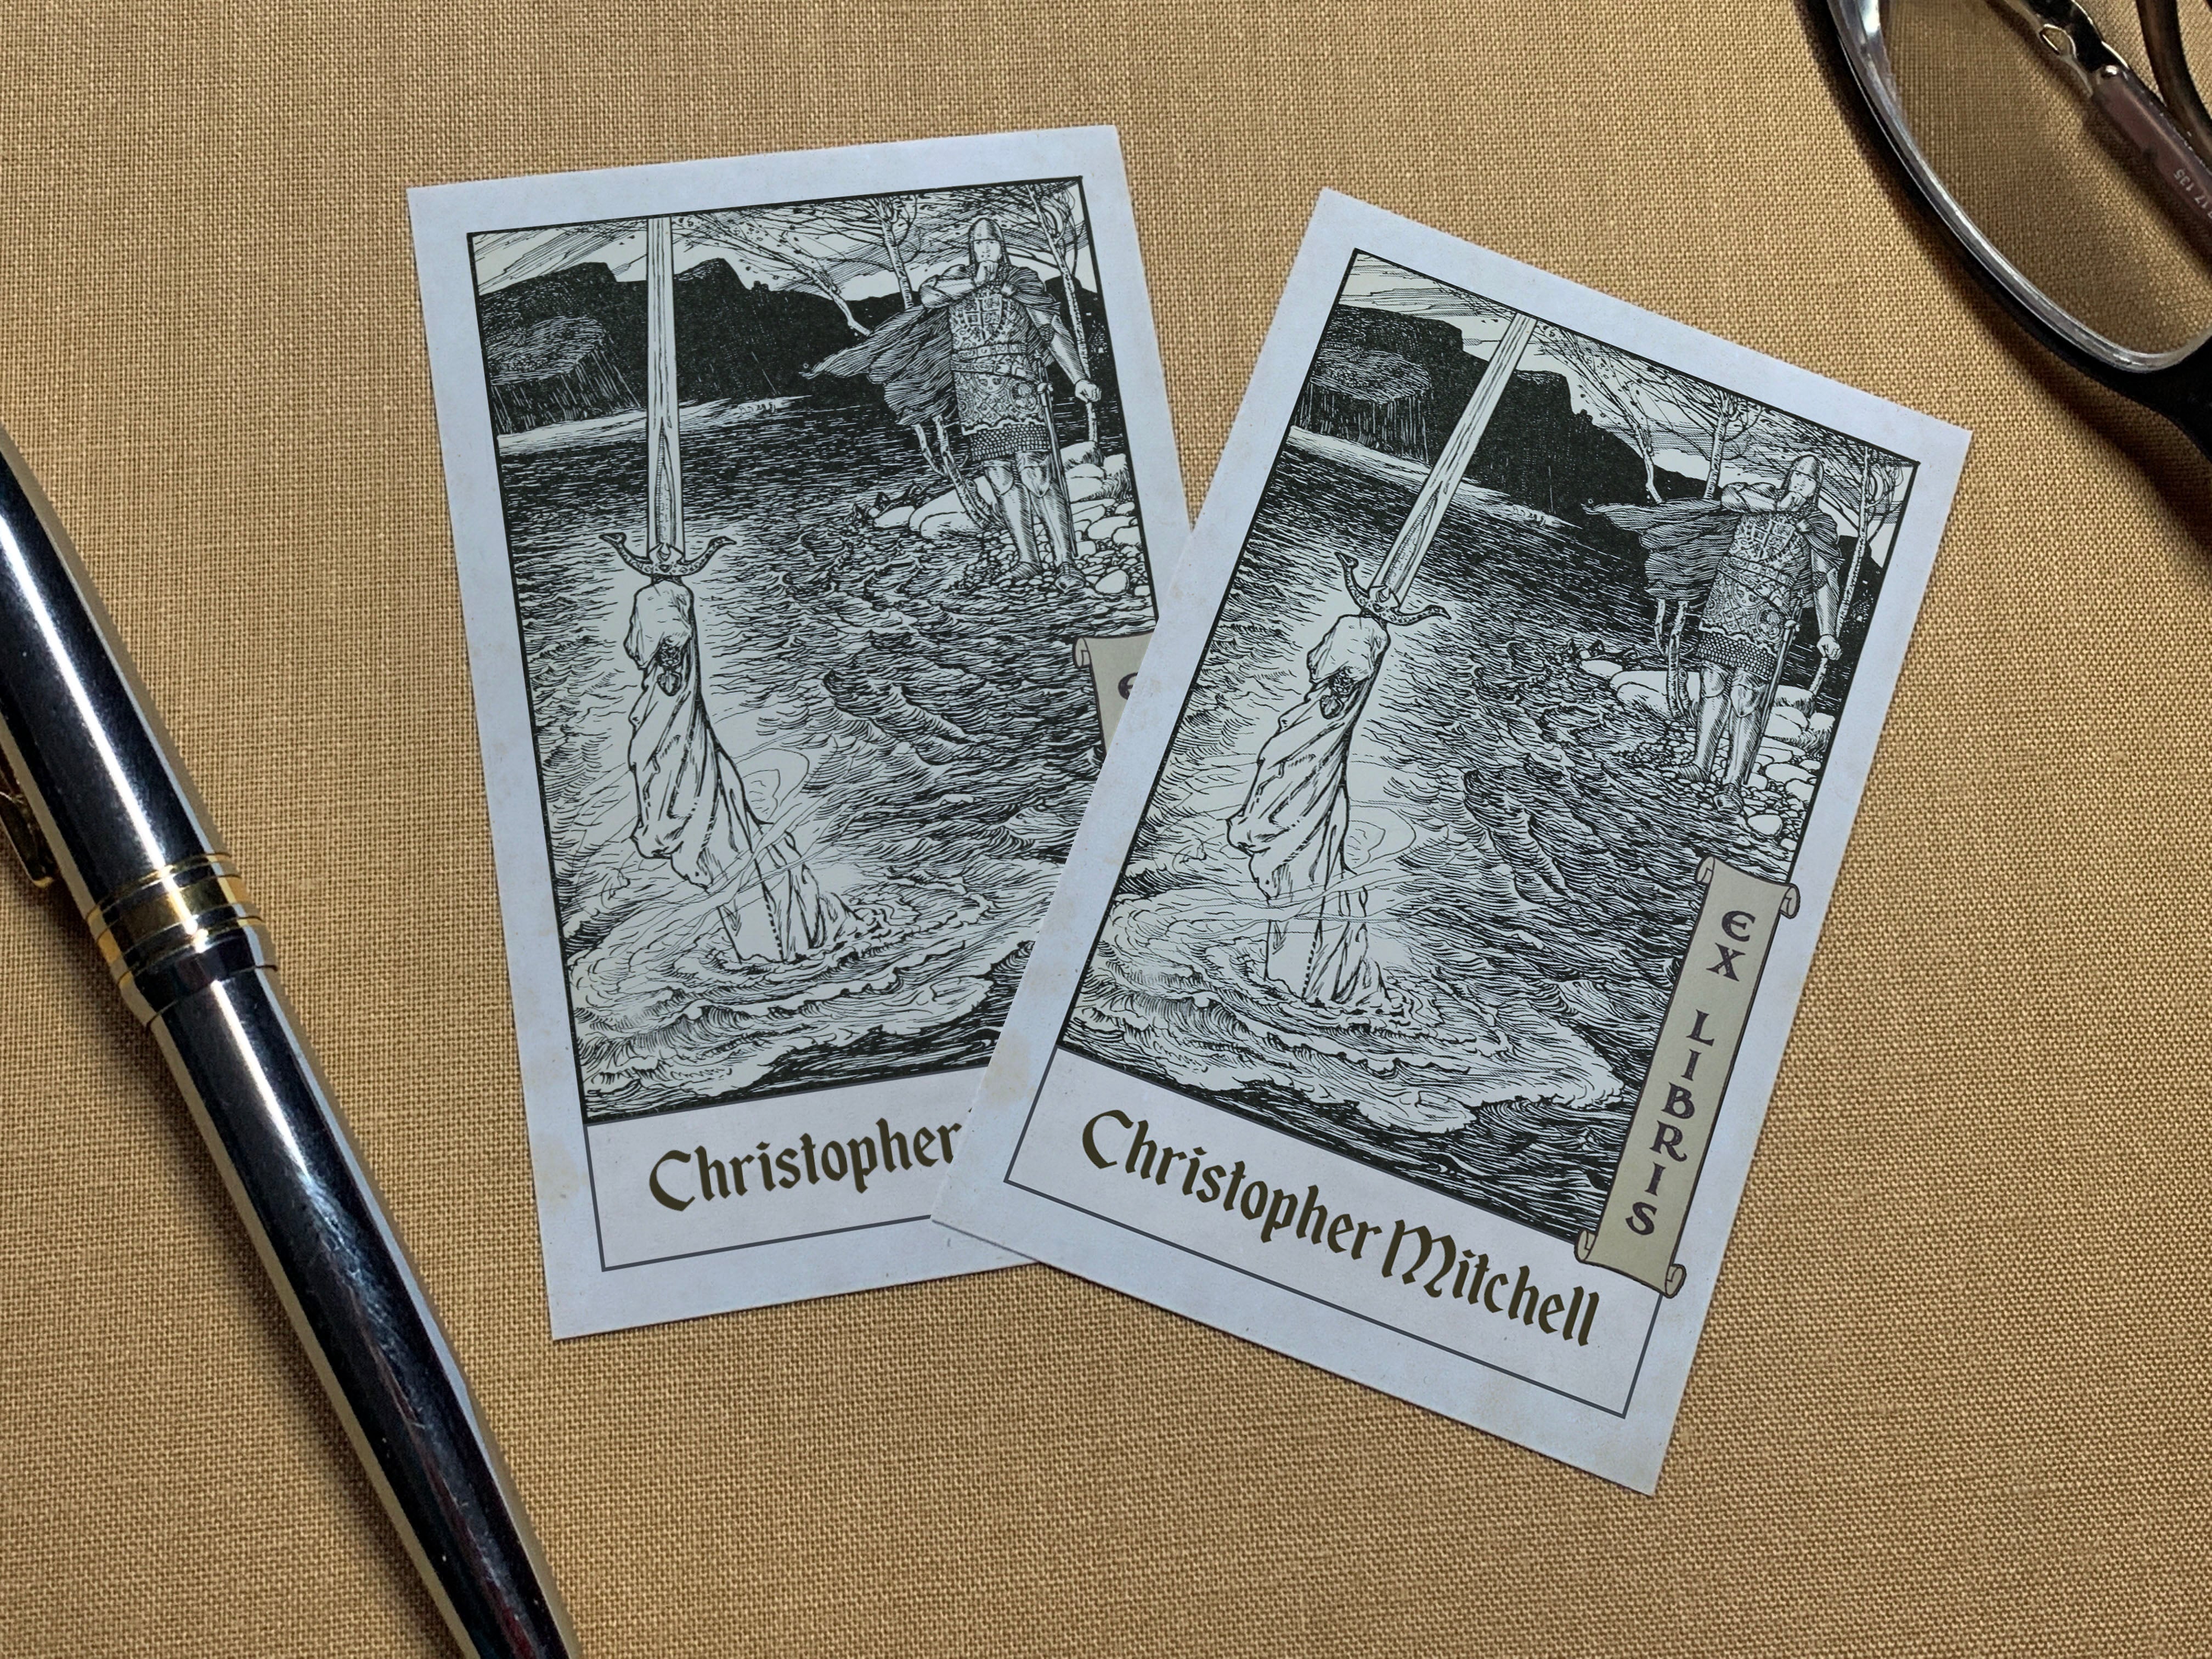 Lady of the Lake, Arthurian, Personalized Ex-Libris Bookplates, Crafted on Traditional Gummed Paper, 2.5in x 4in, Set of 30